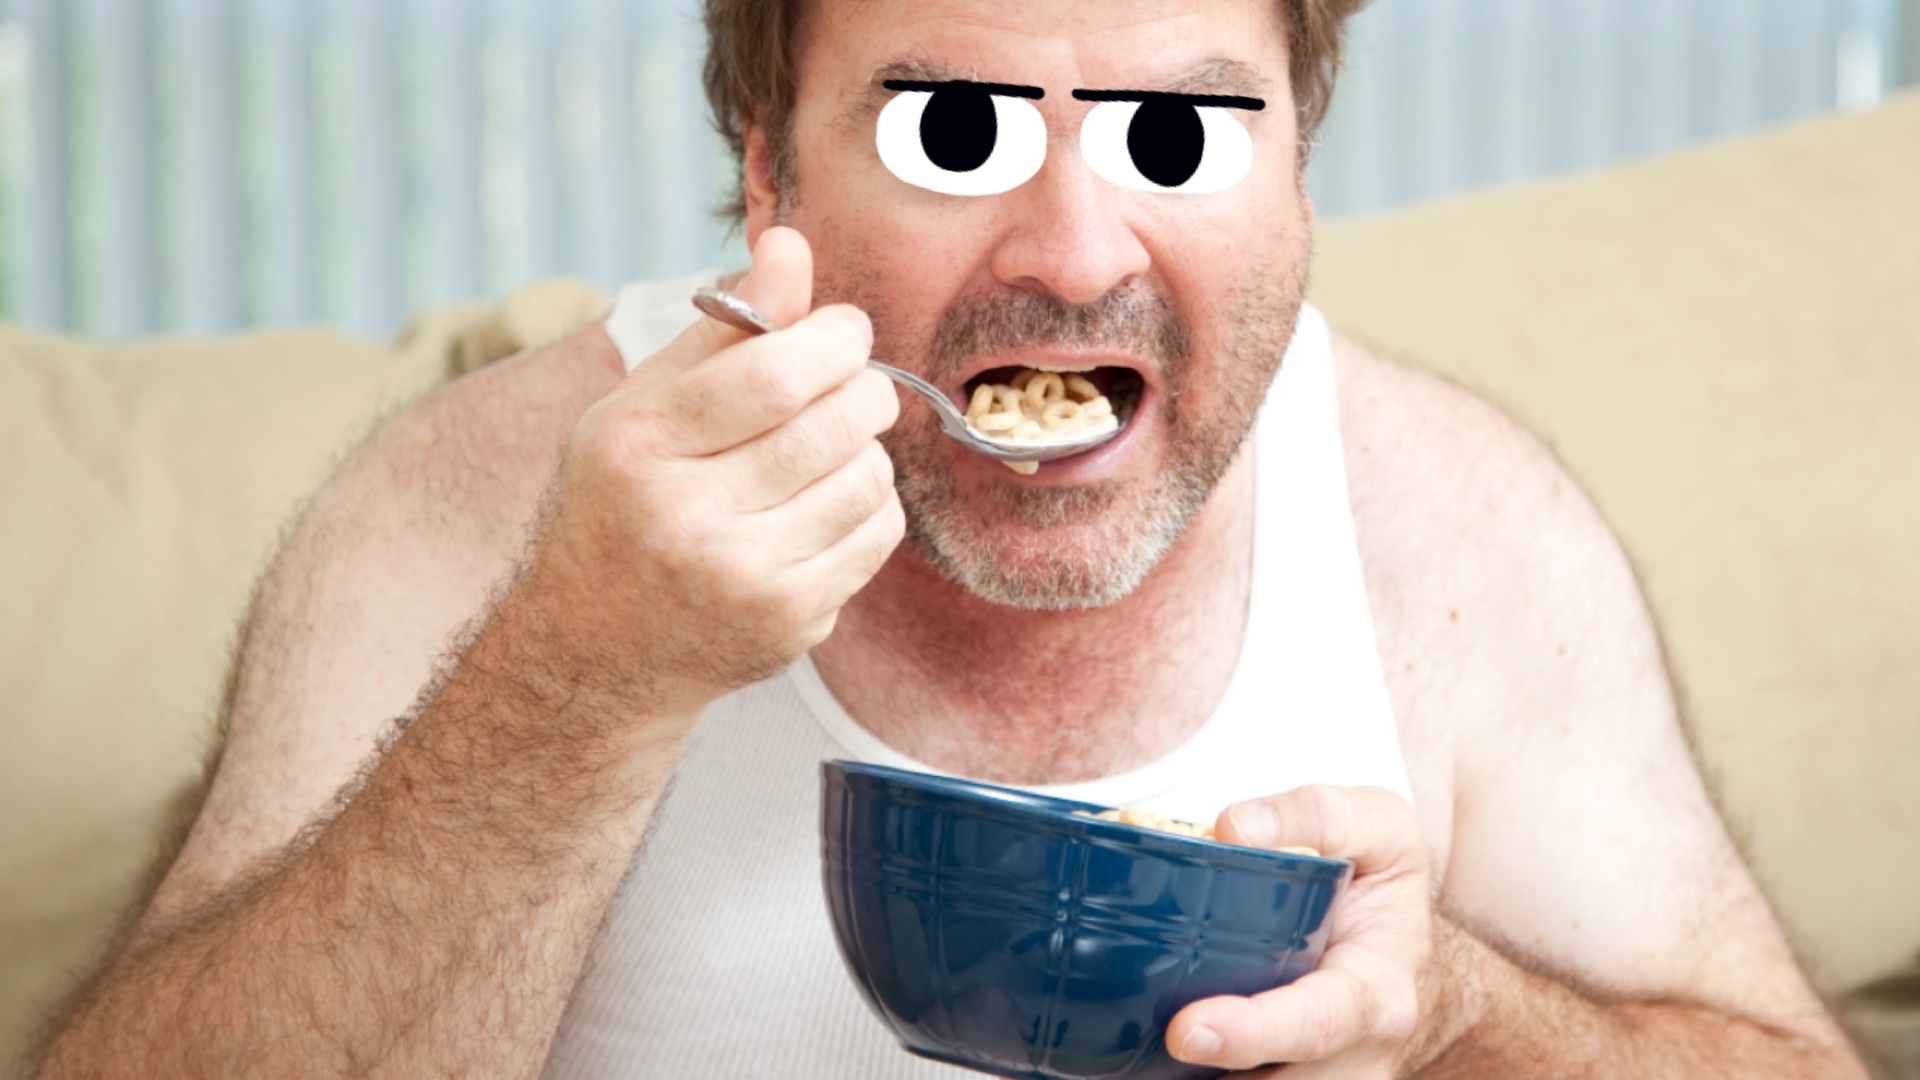 A man eating cereal